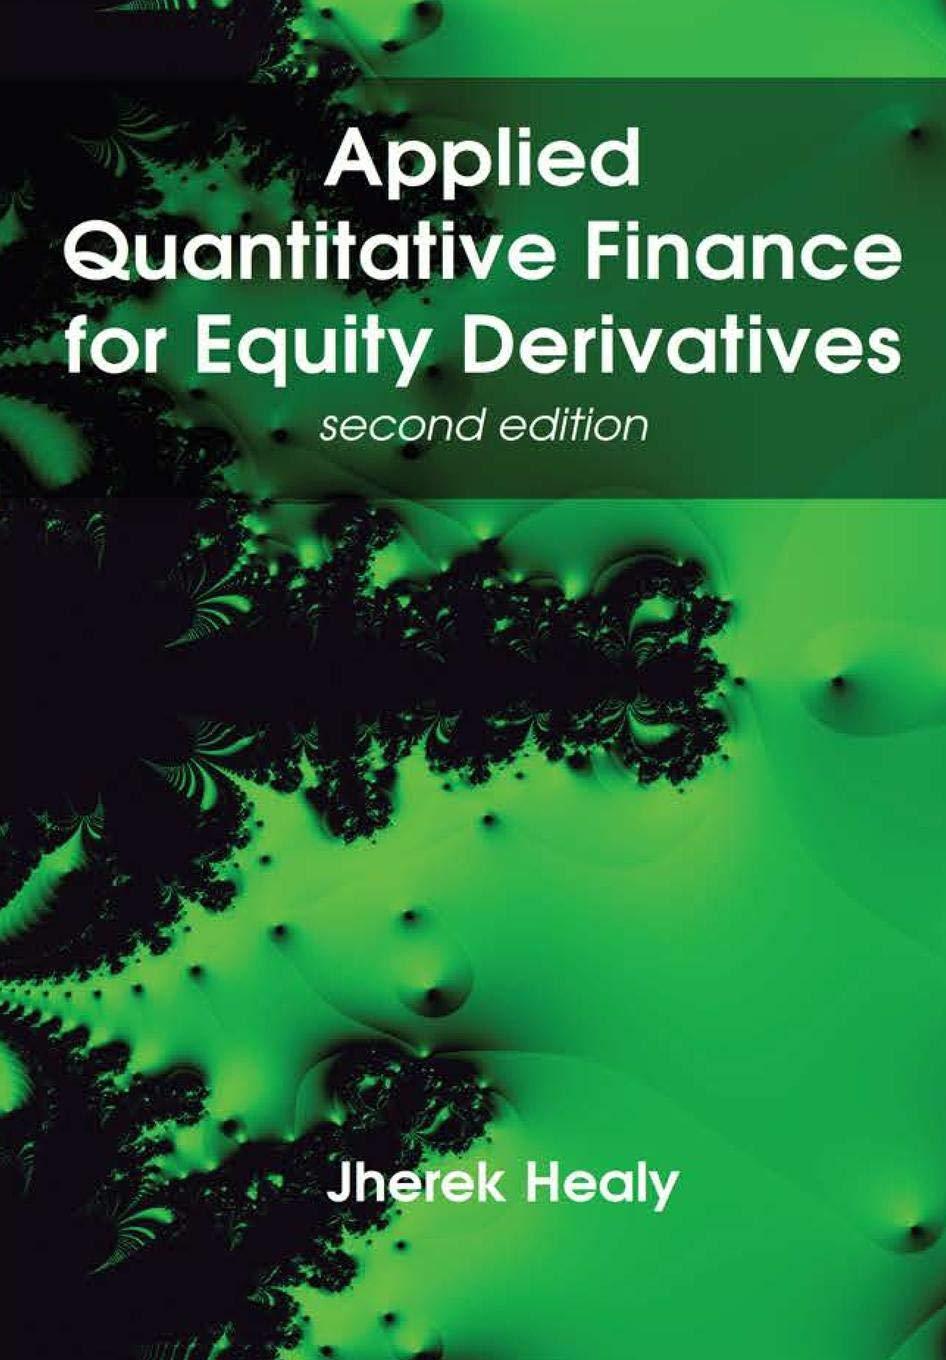 applied quantitative finance for equity derivatives 2nd edition jherek healy 0244741581, 978-0244741587